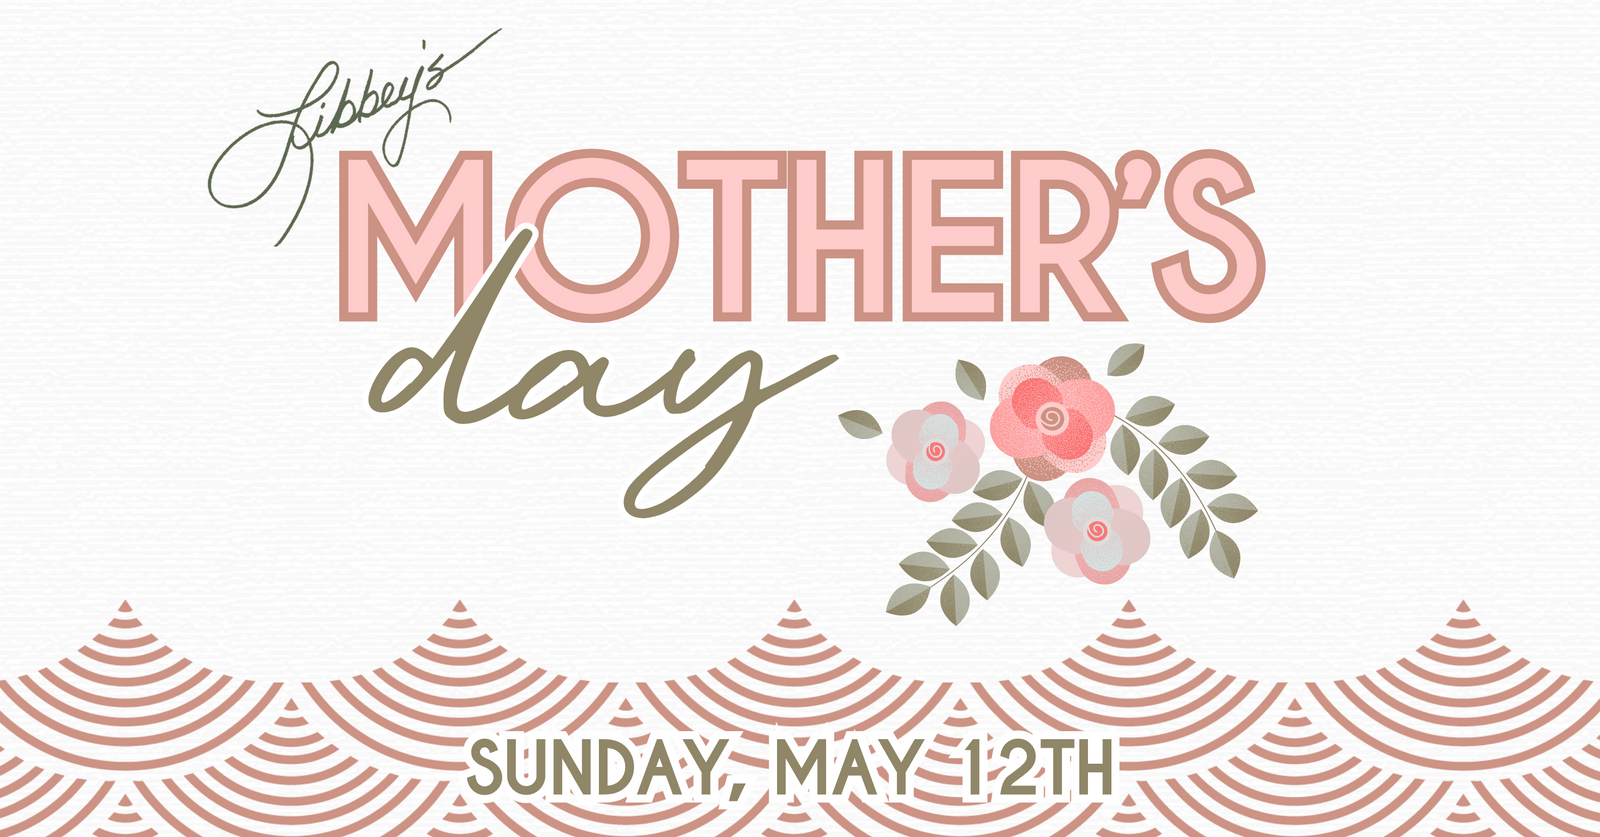 Libbey's Mother's Day Web Graphic.png